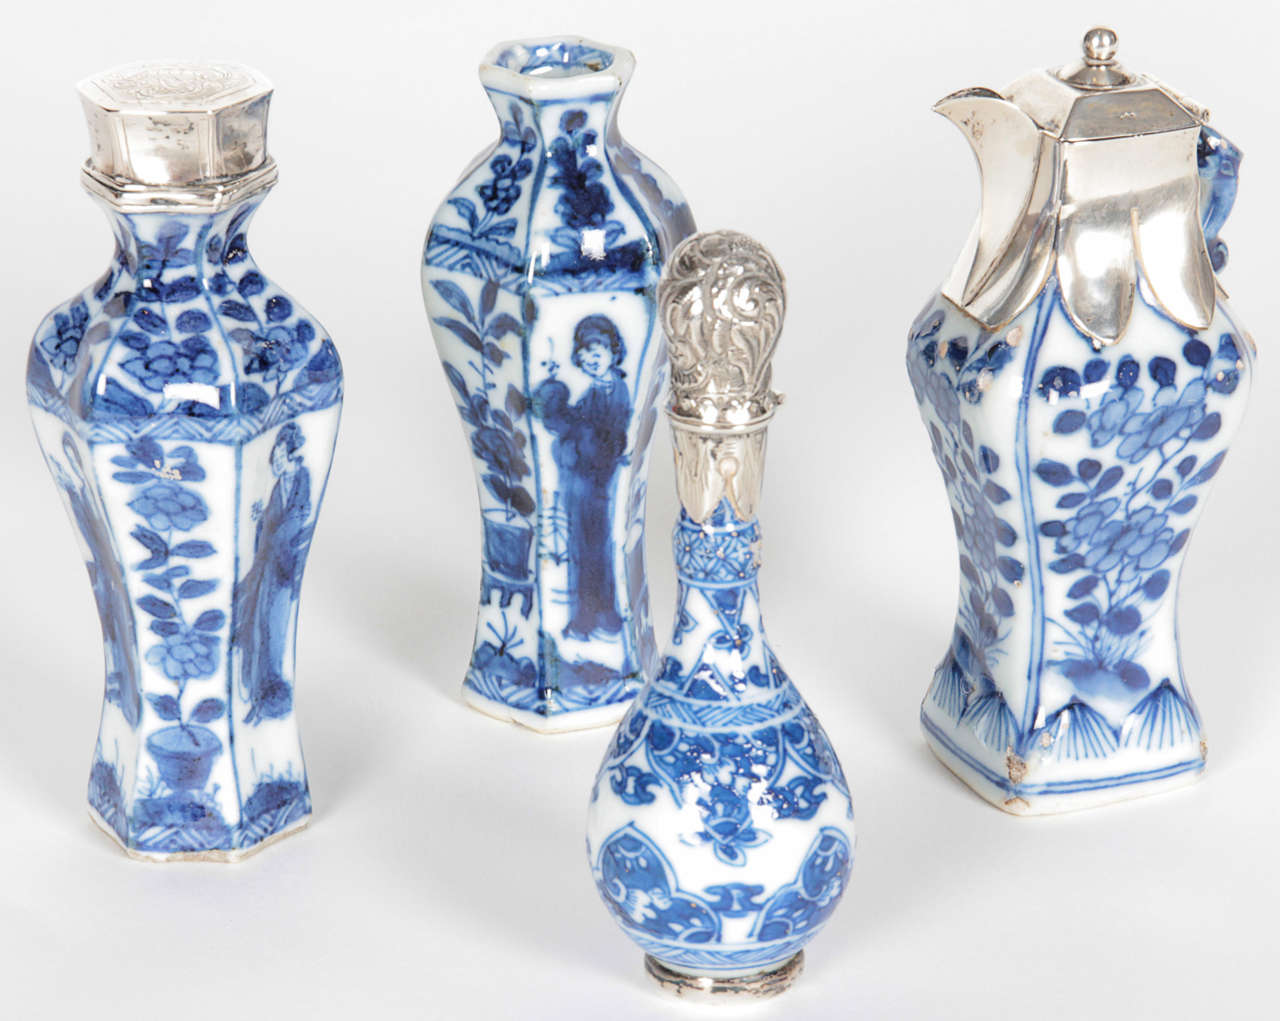 Four miniature Chinese export vases some with Dutch silver
mountings Ca 1780
1   Octagonal shaped vase 4 inches tall - image 4

2  Octagonal shaped vase with silver top - image 3
     4.25 inches tall  small chip

3   Silver mounted vase with